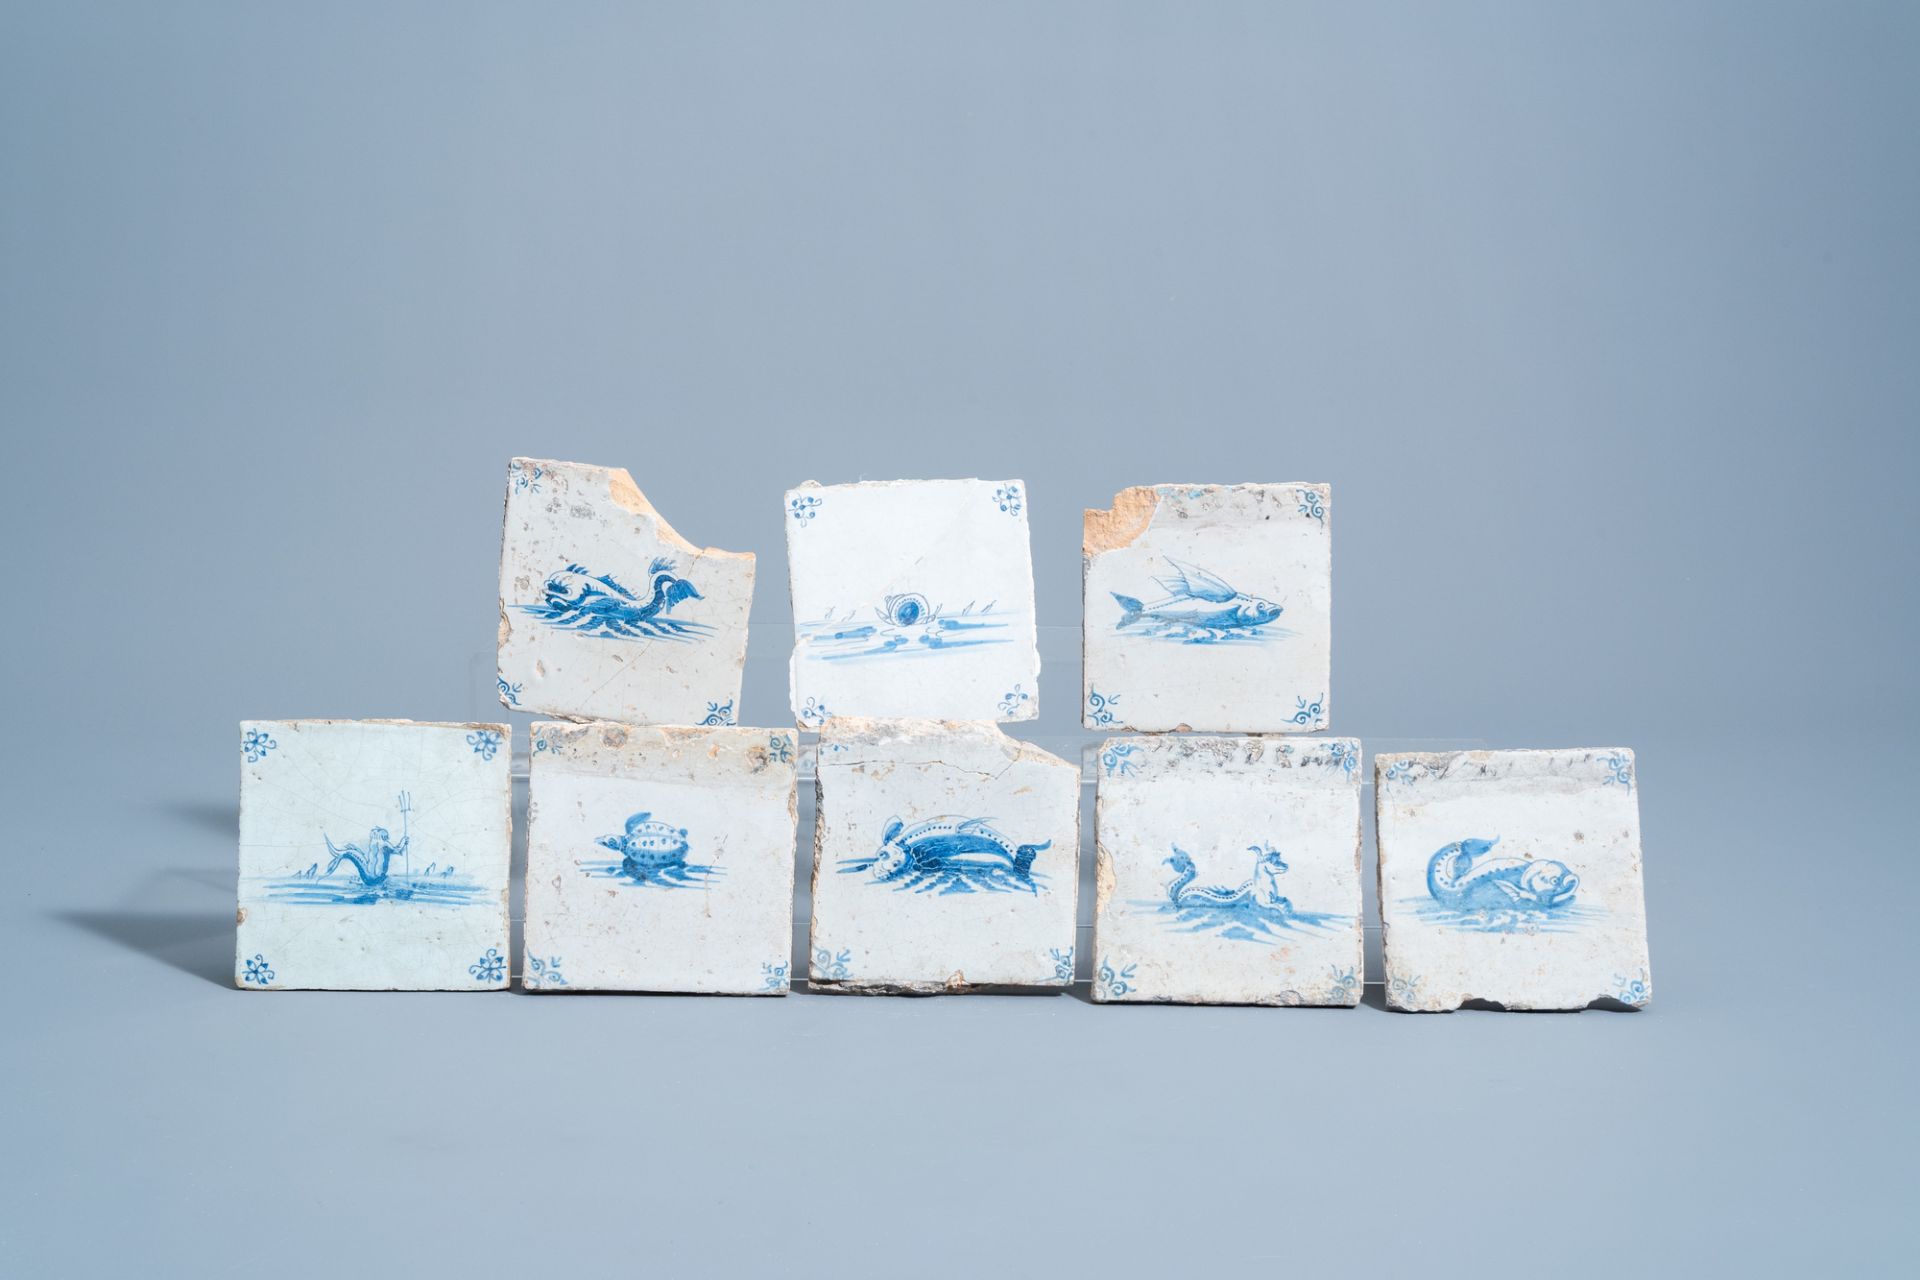 Eight Dutch Delft blue and white 'sea monster' tiles, 17th C.